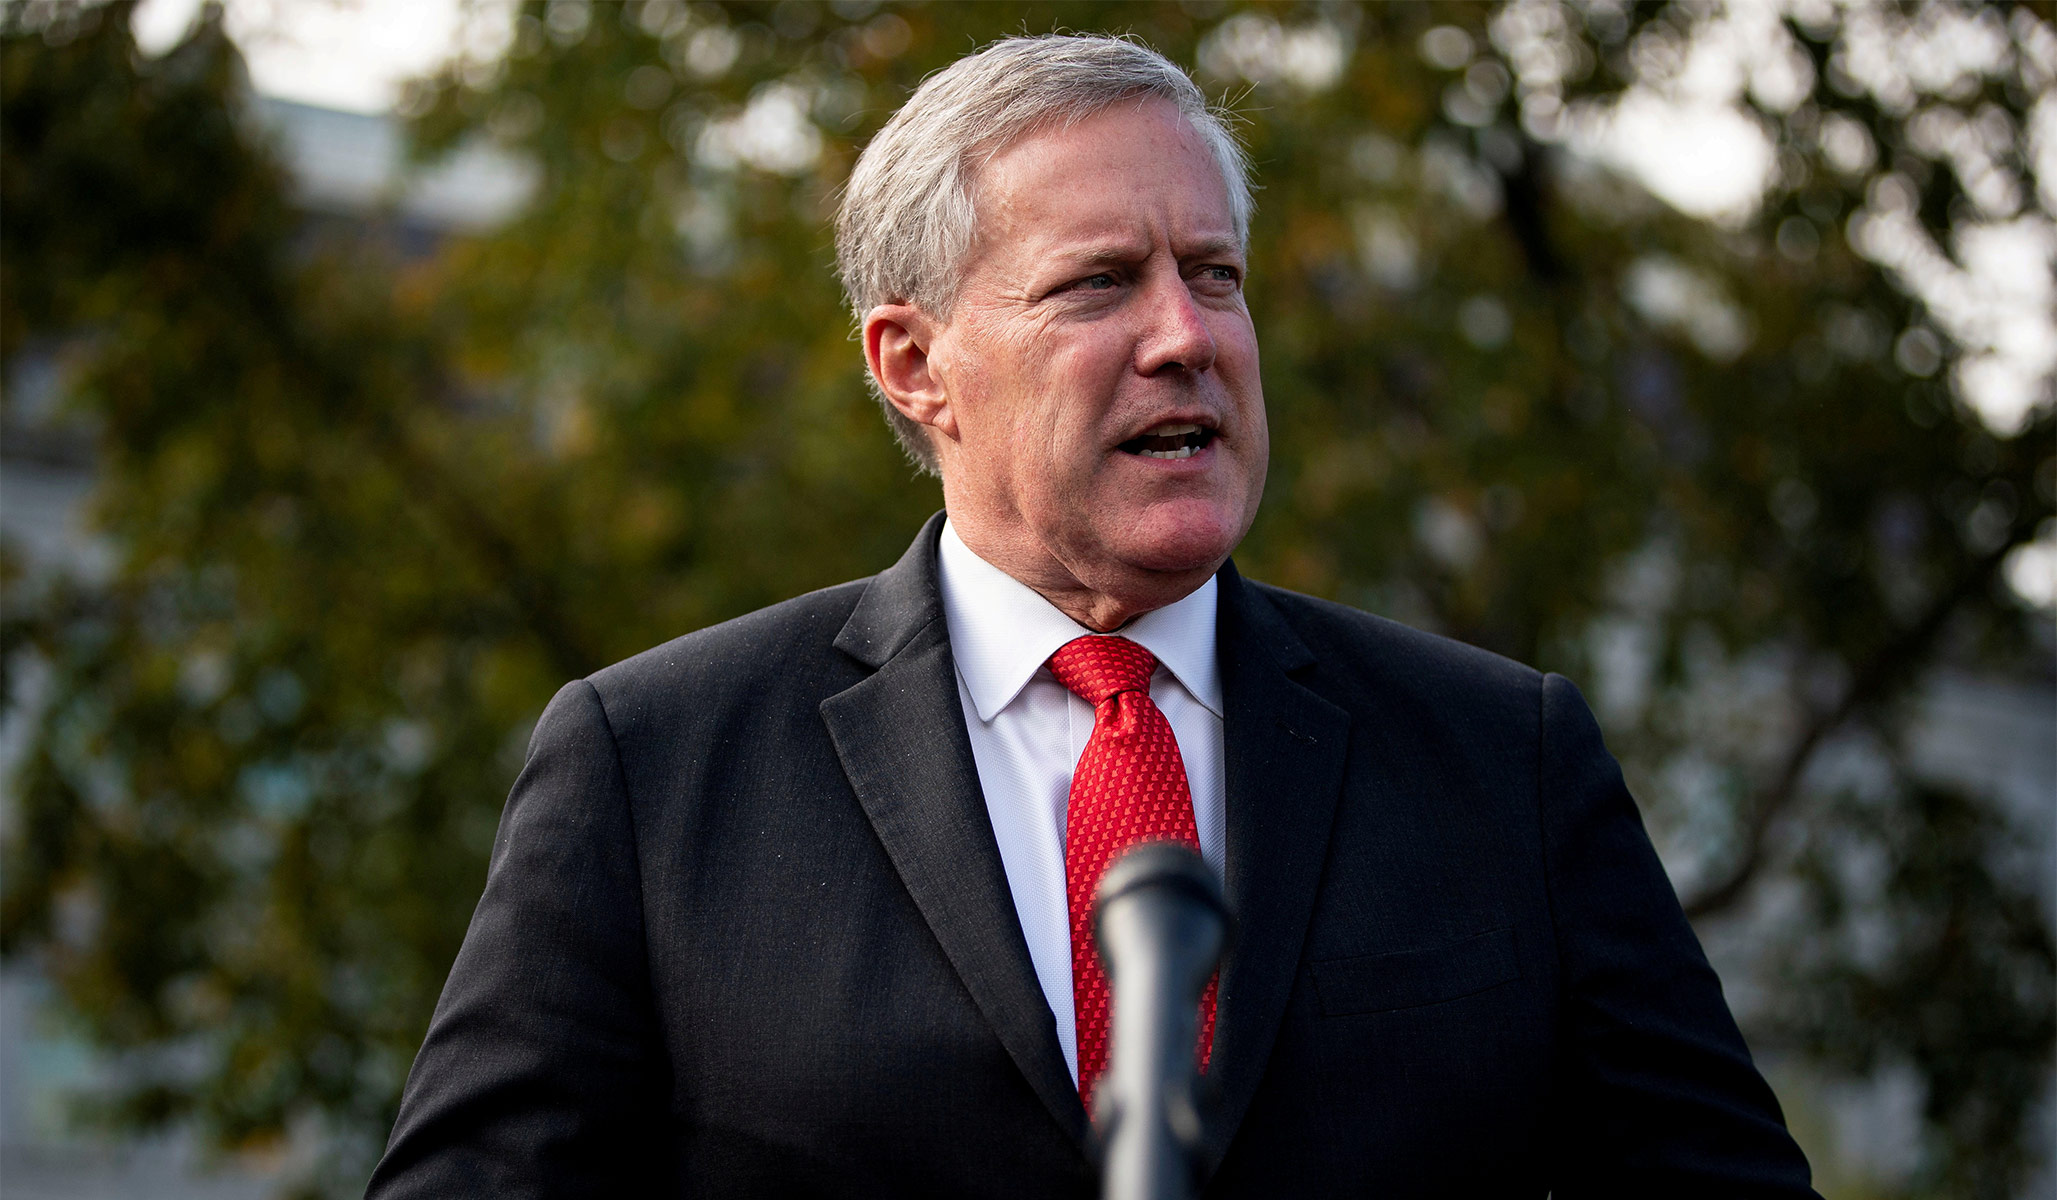 January 6 Committee Votes to Recommend Contempt Charges for Mark Meadows